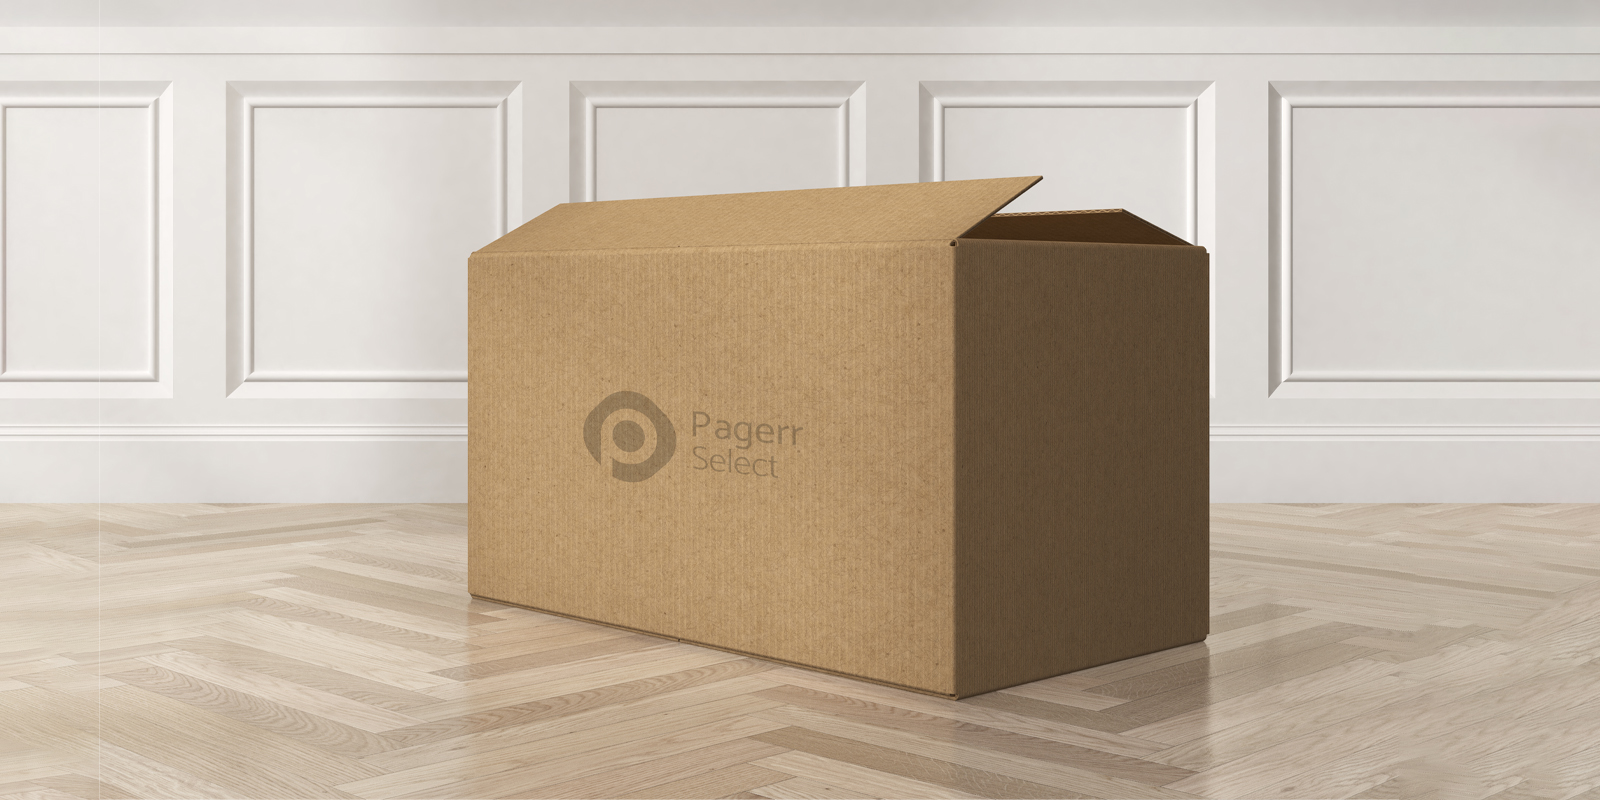 Moving boxes in Geelong - Print with Pagerr